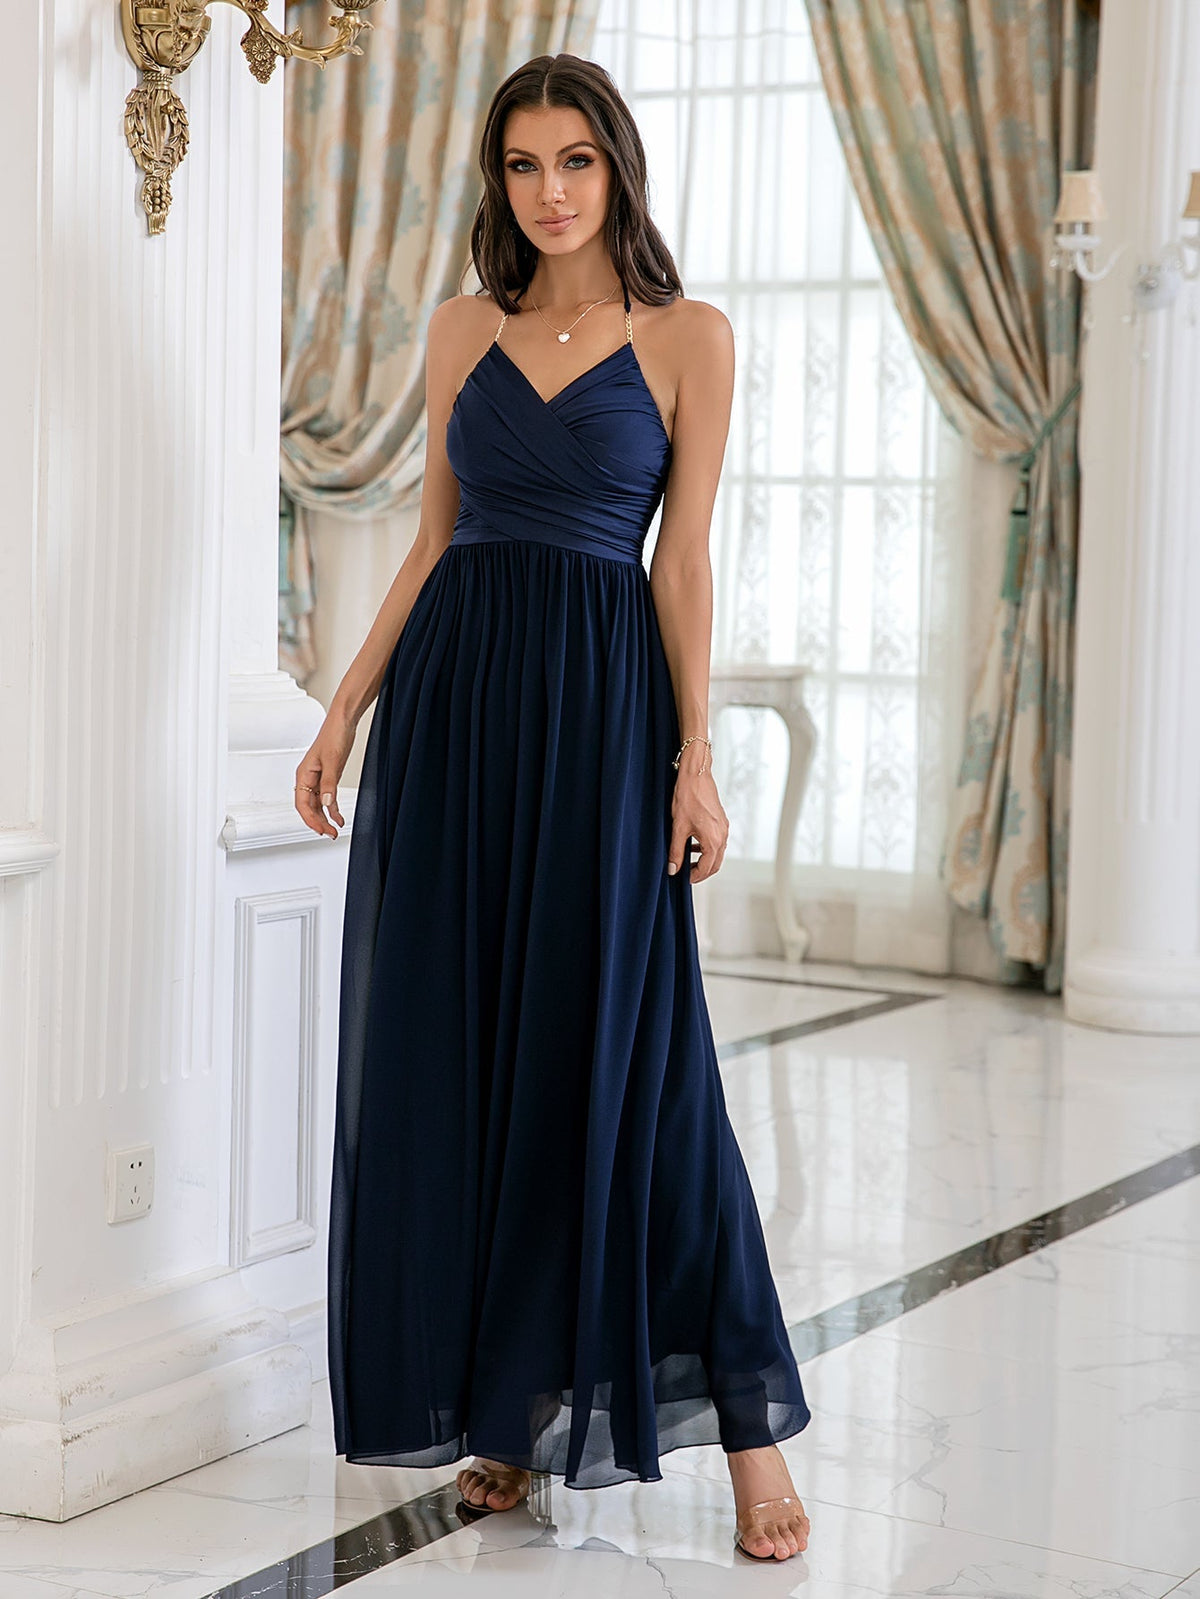 Navy A line Party Dress